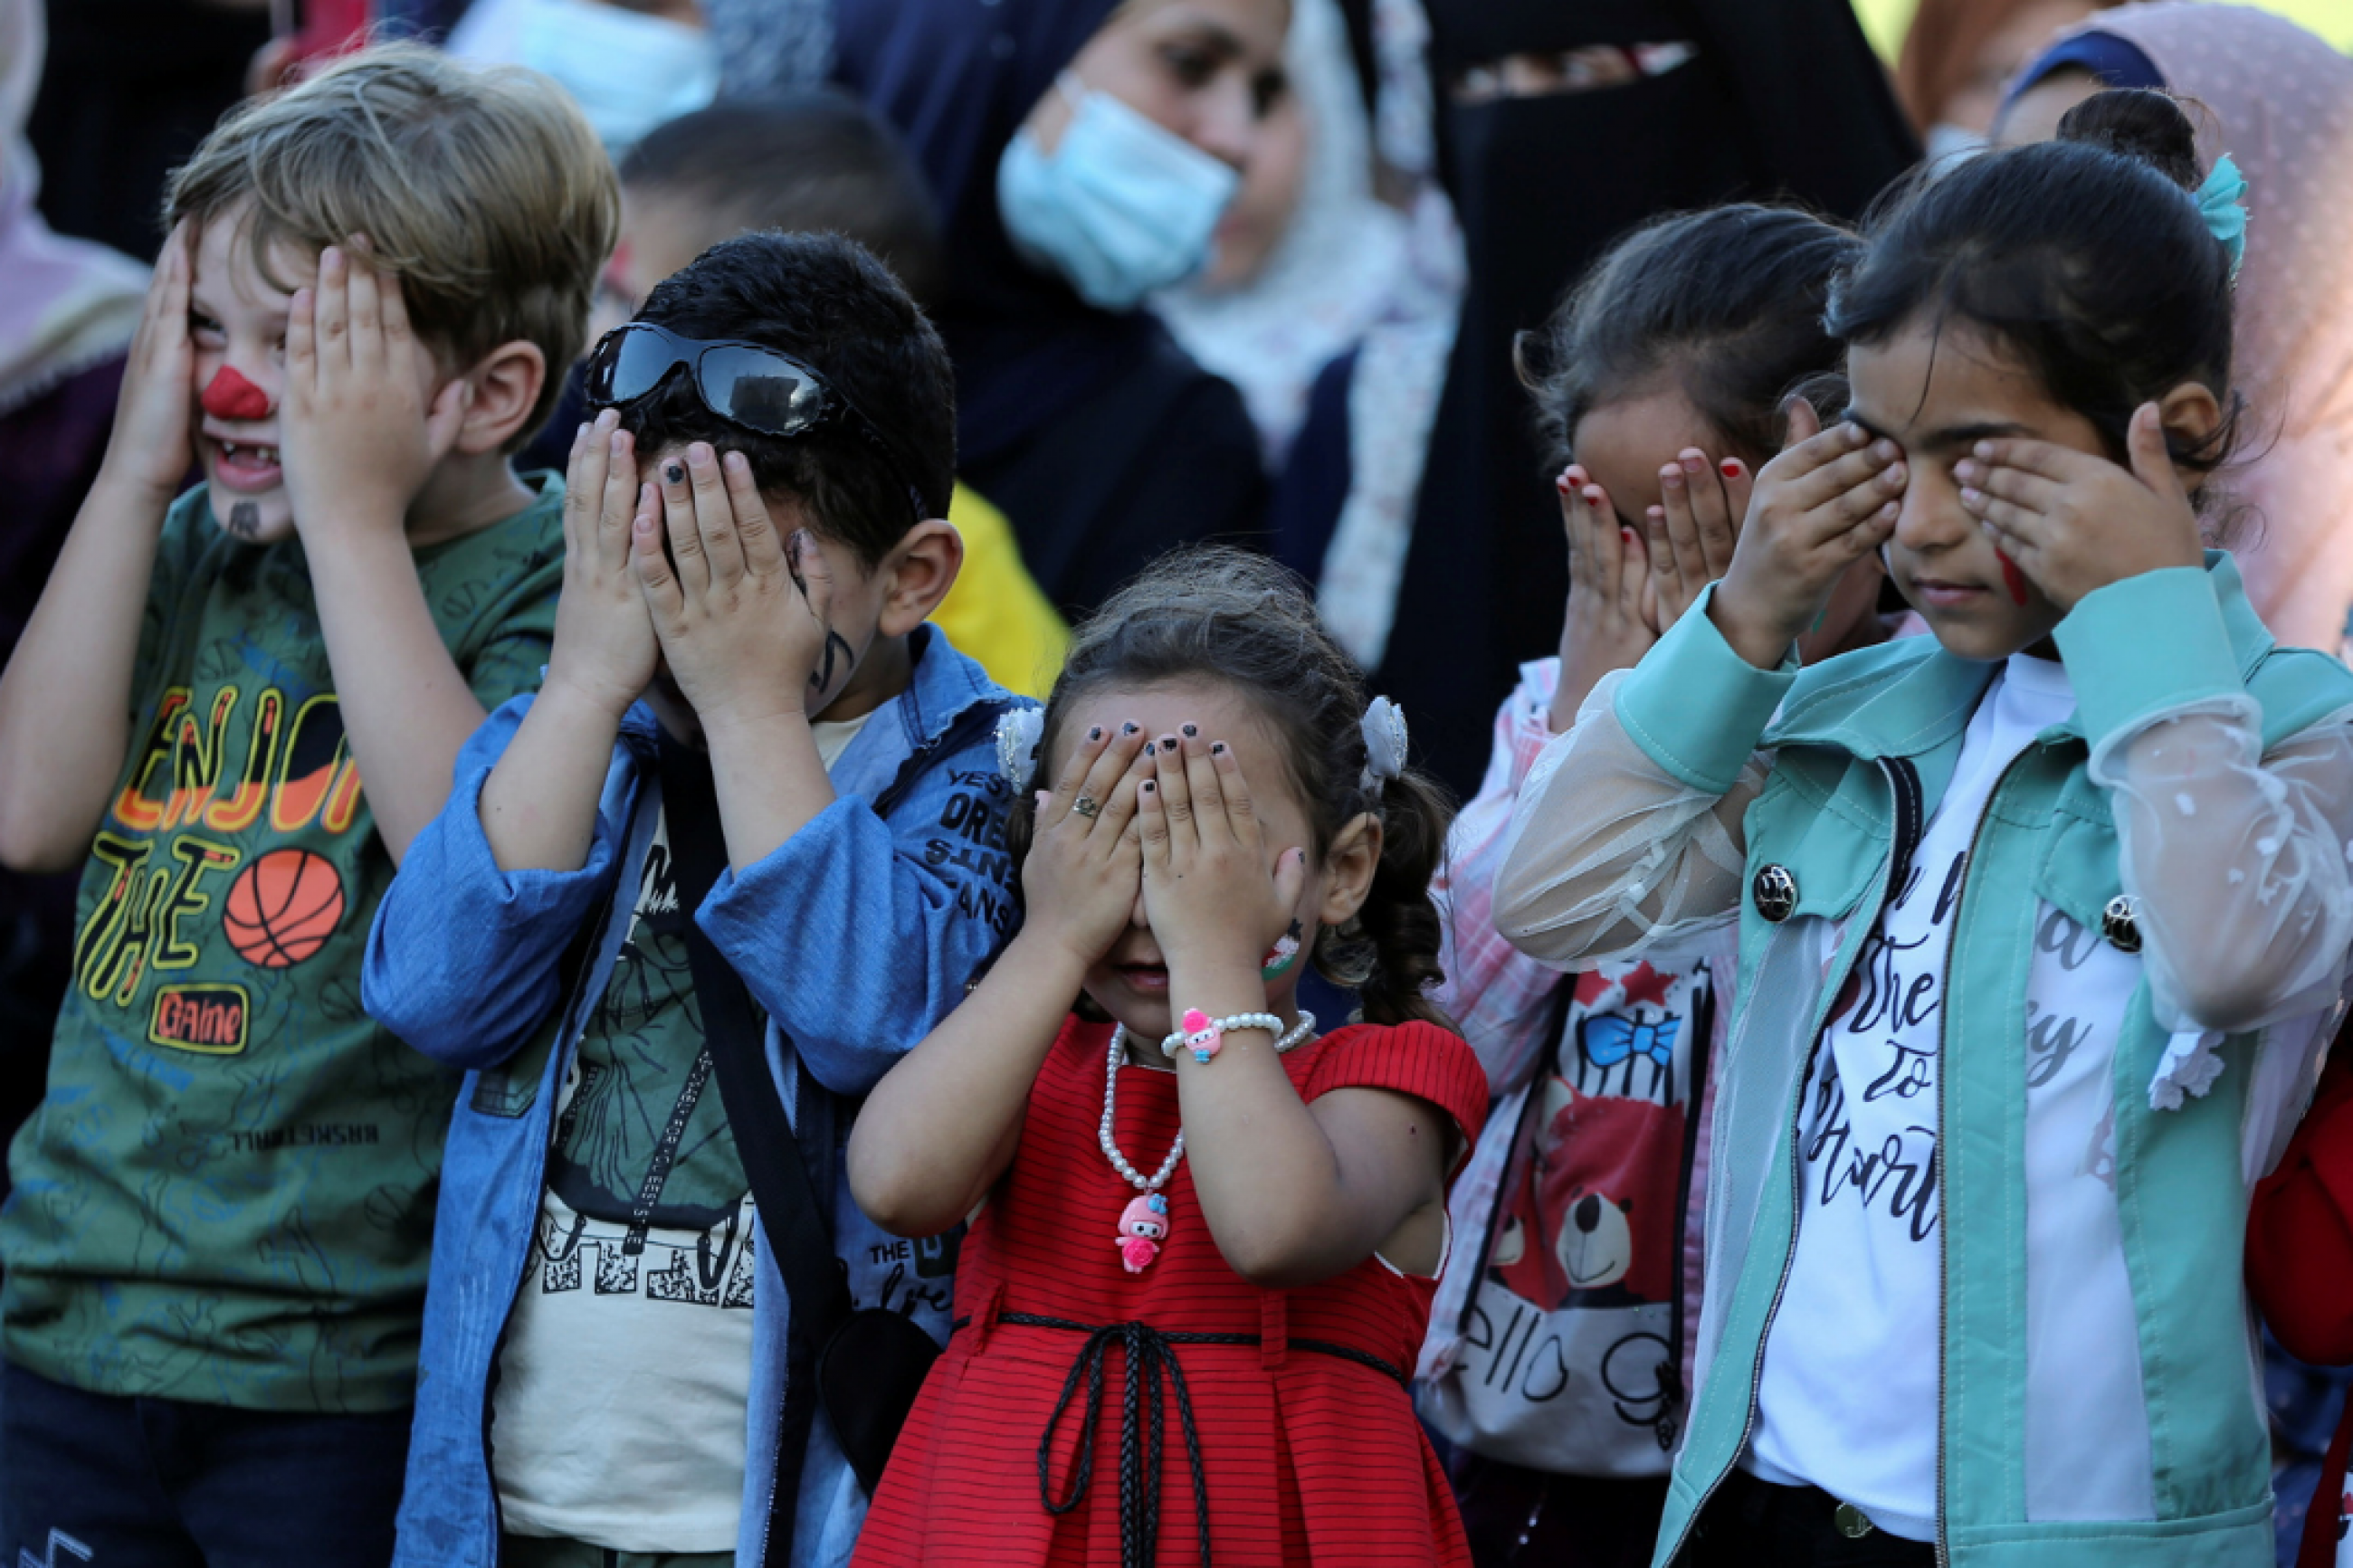 Palestinian children cover their eyes as they participate in a mental health support session in Khan Younis in the southern Gaza Strip on June 6, 2021.